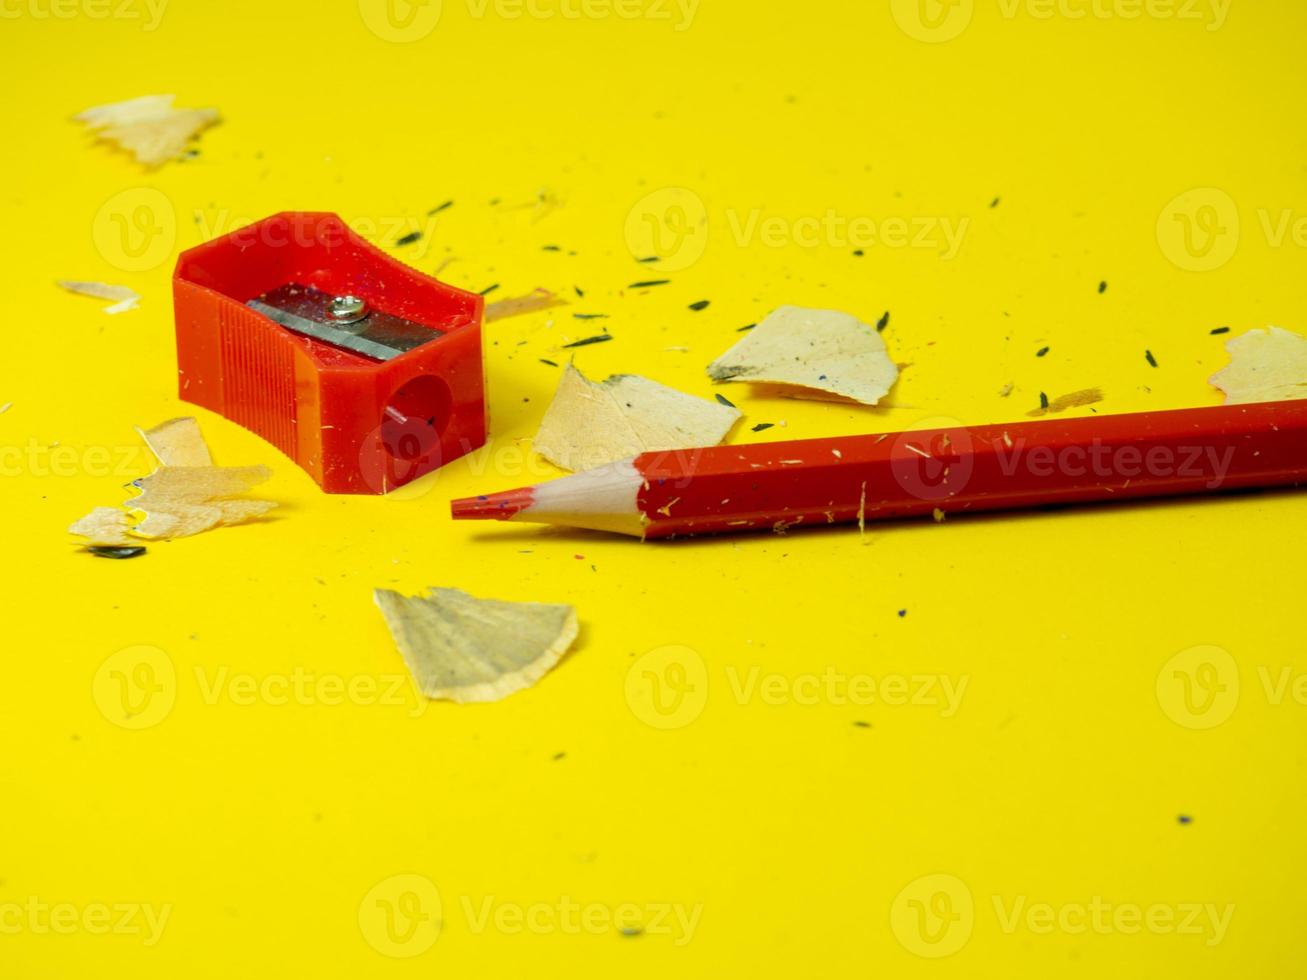 School supplies.   Pencil sharpener . Red pencil. Wood shavings. The process of preparing for work. Creative mess photo